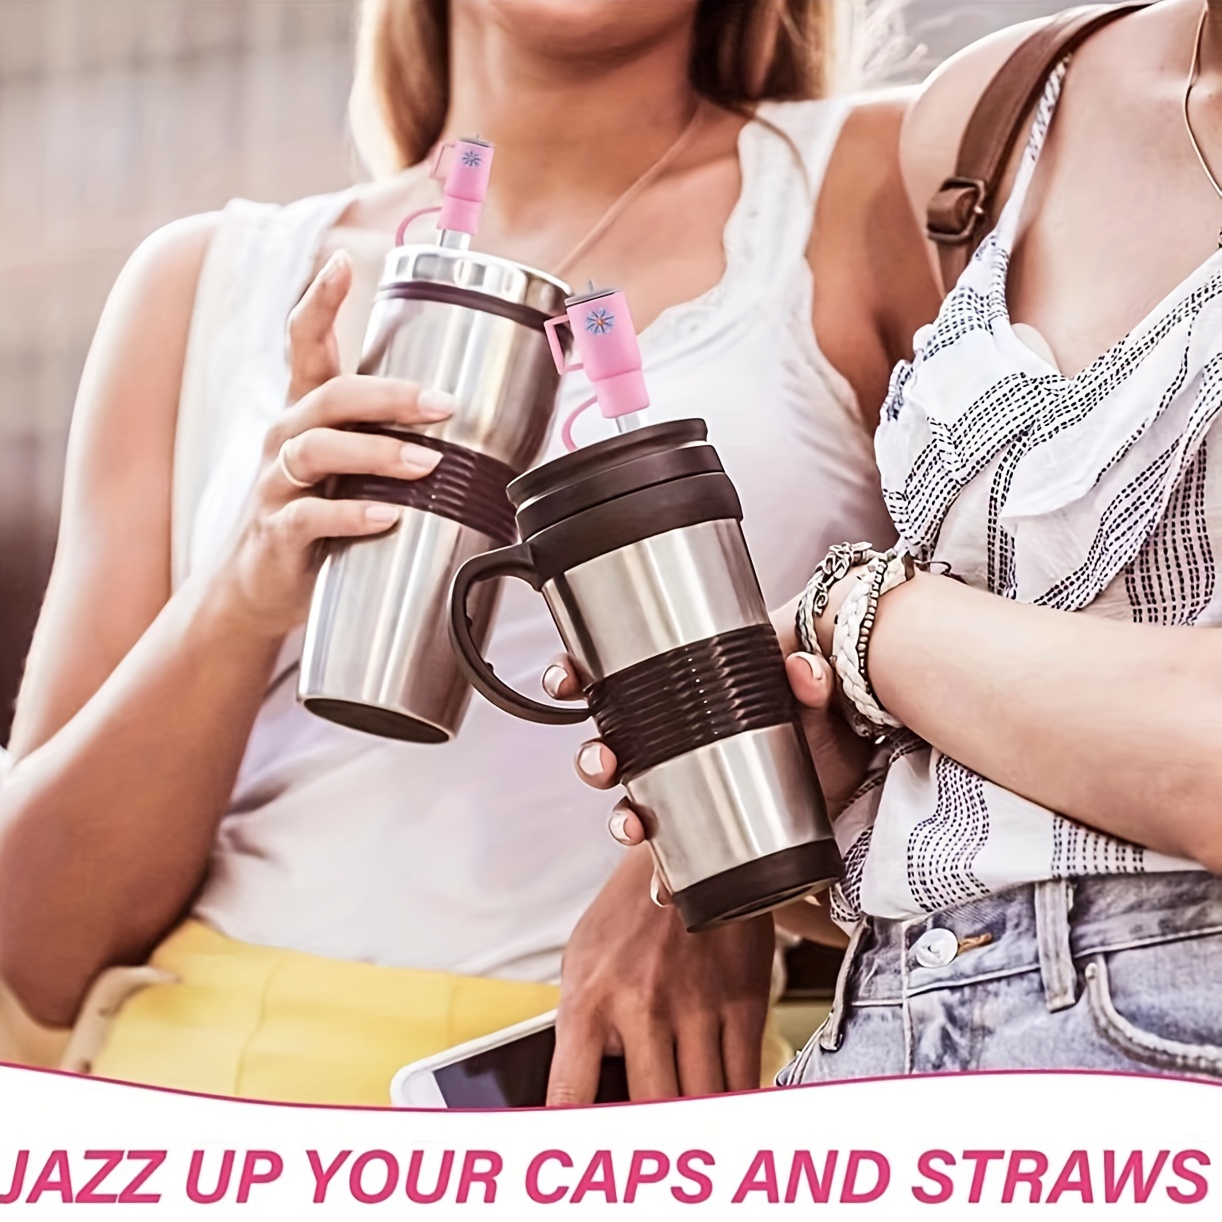 4 Pcs Straw Covers for Stanley Cup 40-20 oz, 0.4 inches Silicone Straw  Cover Caps, Stanley Cups Accessories, Dust-proof and leak-proof (4 Straw